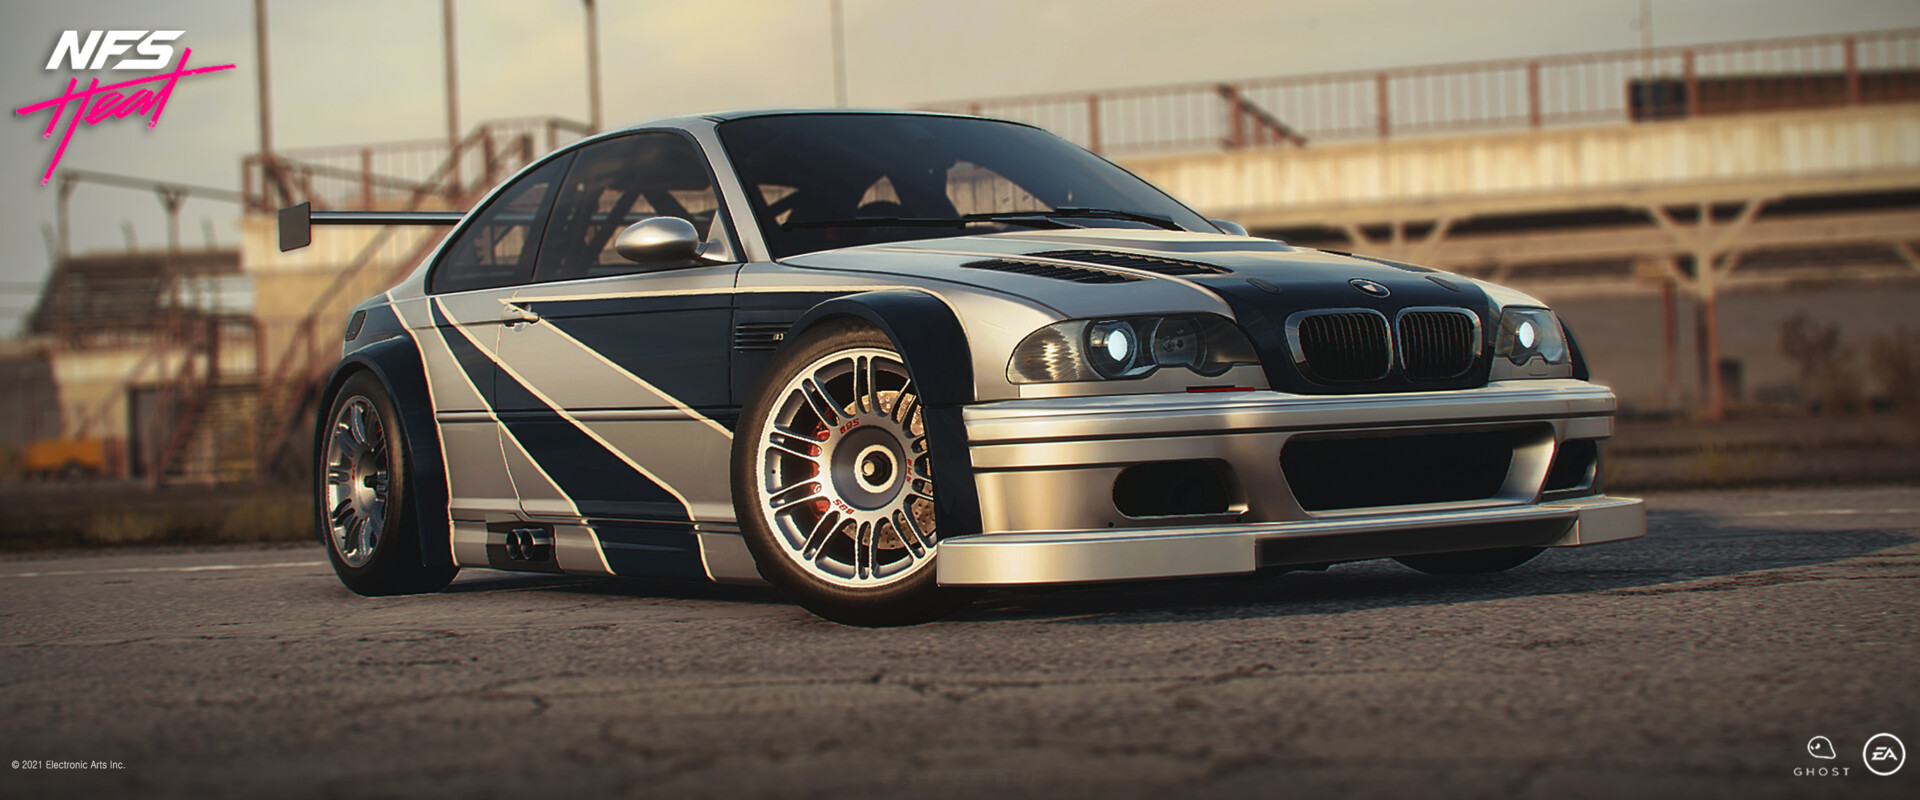 Need For Speed Most Wanted BMW M3 GTR (NFS HEAT ENGINE SOUND & P60B40 V8 ENGINE SOUND)